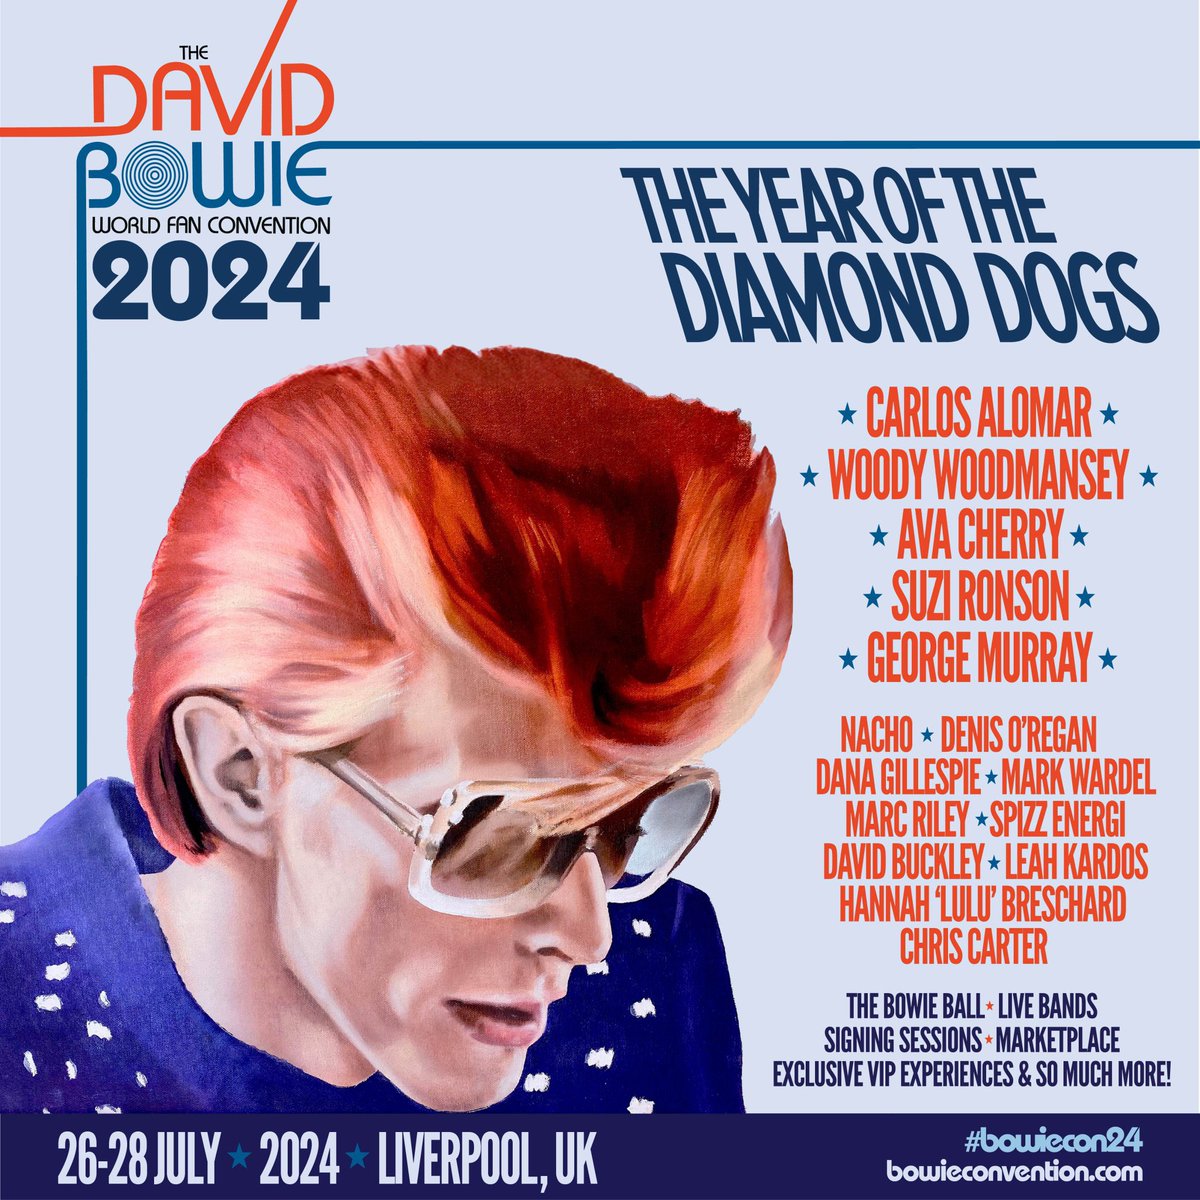 David Bowie World Convention 2024 in Liverpool
https://t.co/KSRIQcmh4m https://t.co/2GdVdkpluz